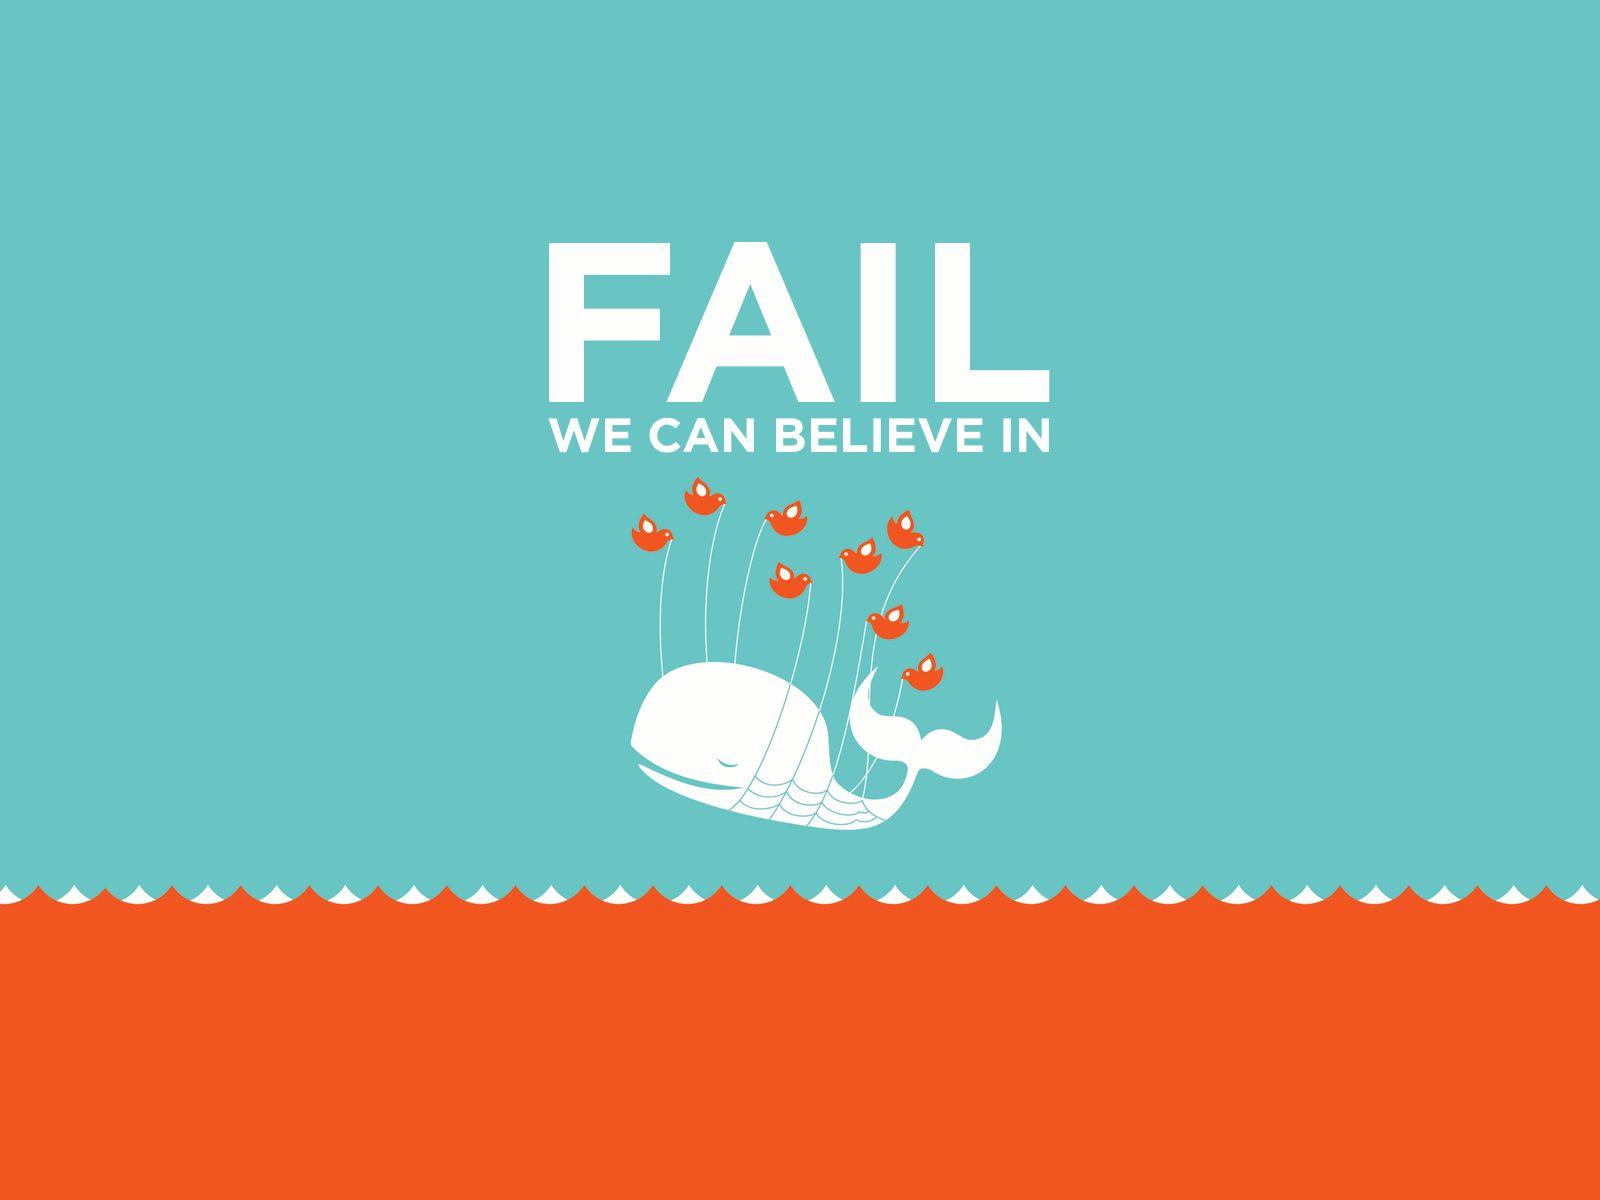 Fail We Can Believe In wallpaper. Fail We Can Believe In